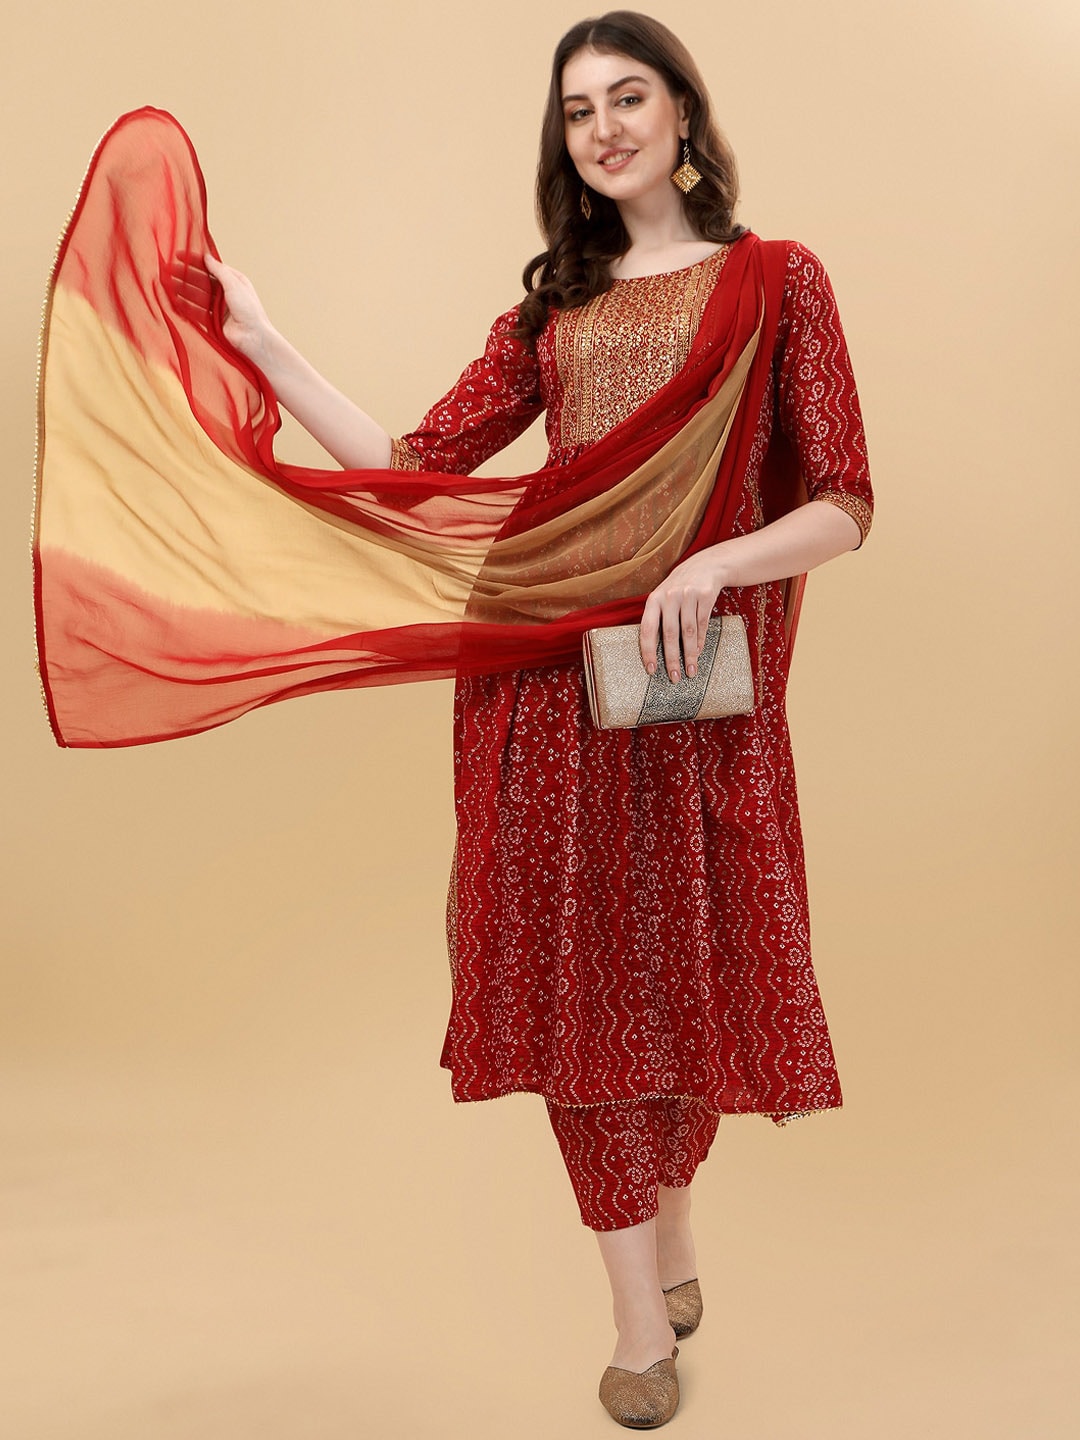 Berrylicious Embroidered Bandhani Pure Cotton Kurta with Trousers & Dupatta Price in India